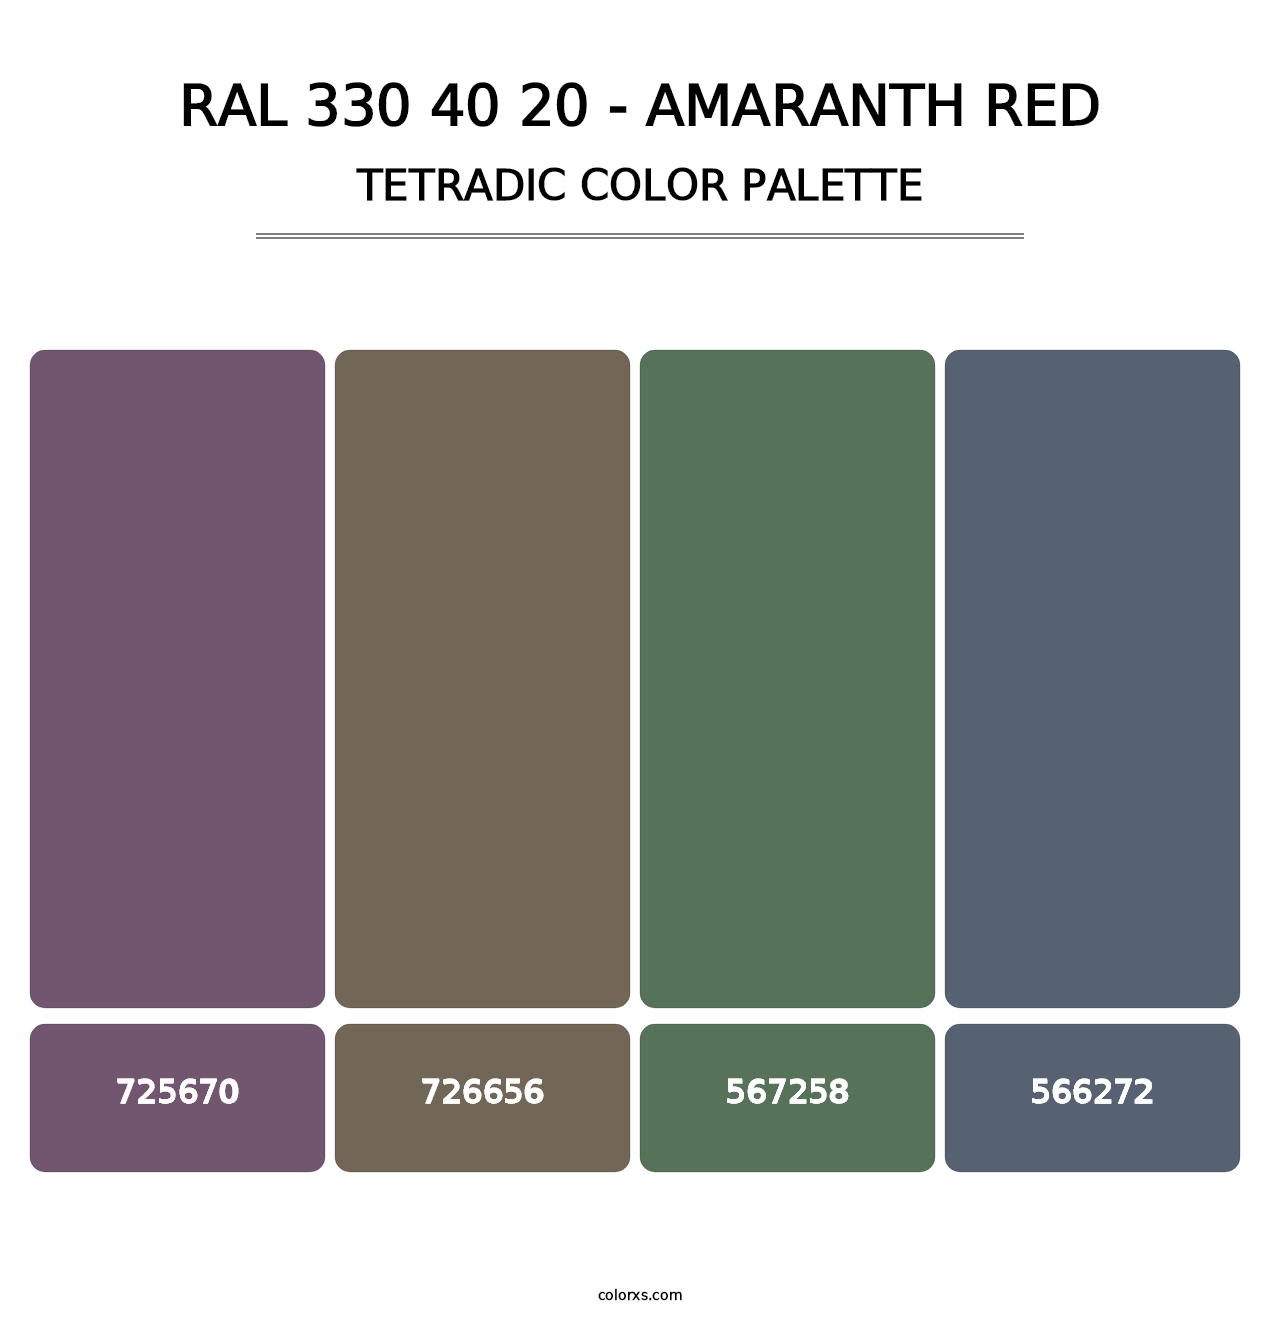 RAL 330 40 20 - Amaranth Red - Tetradic Color Palette